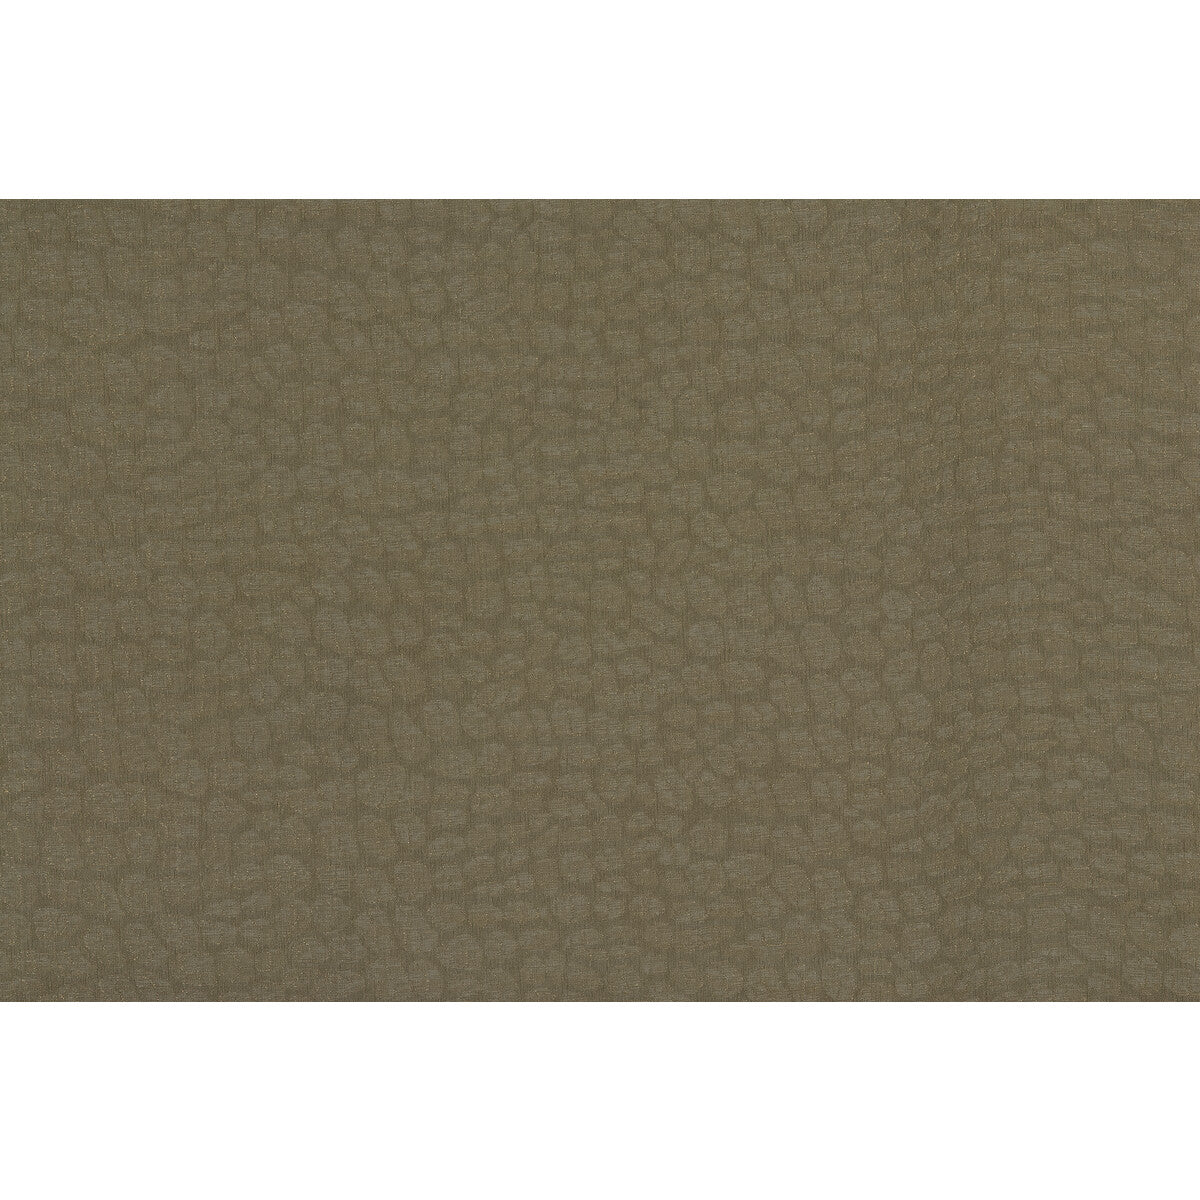 Moreno fabric in bronze color - pattern 4276.6.0 - by Kravet Contract